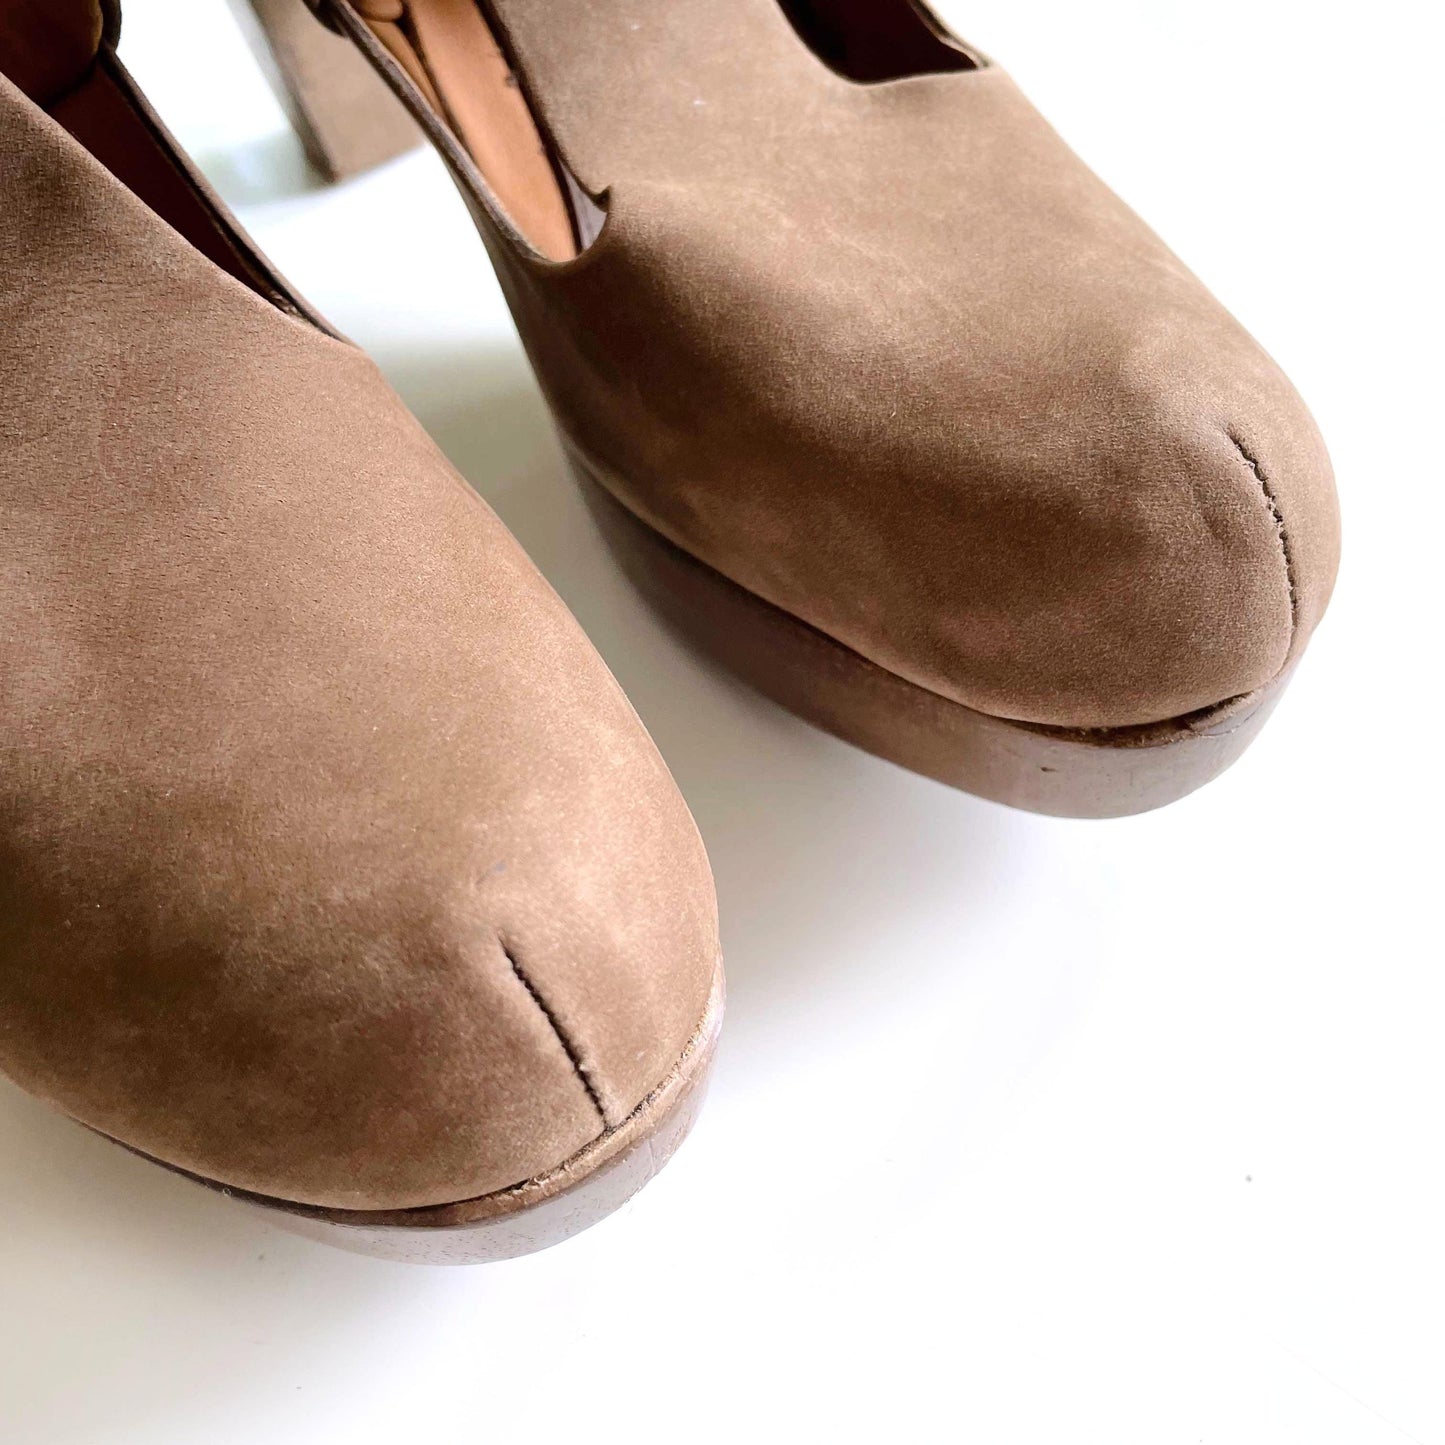 anthro rachel comey leather cut out wood clogs - size 10